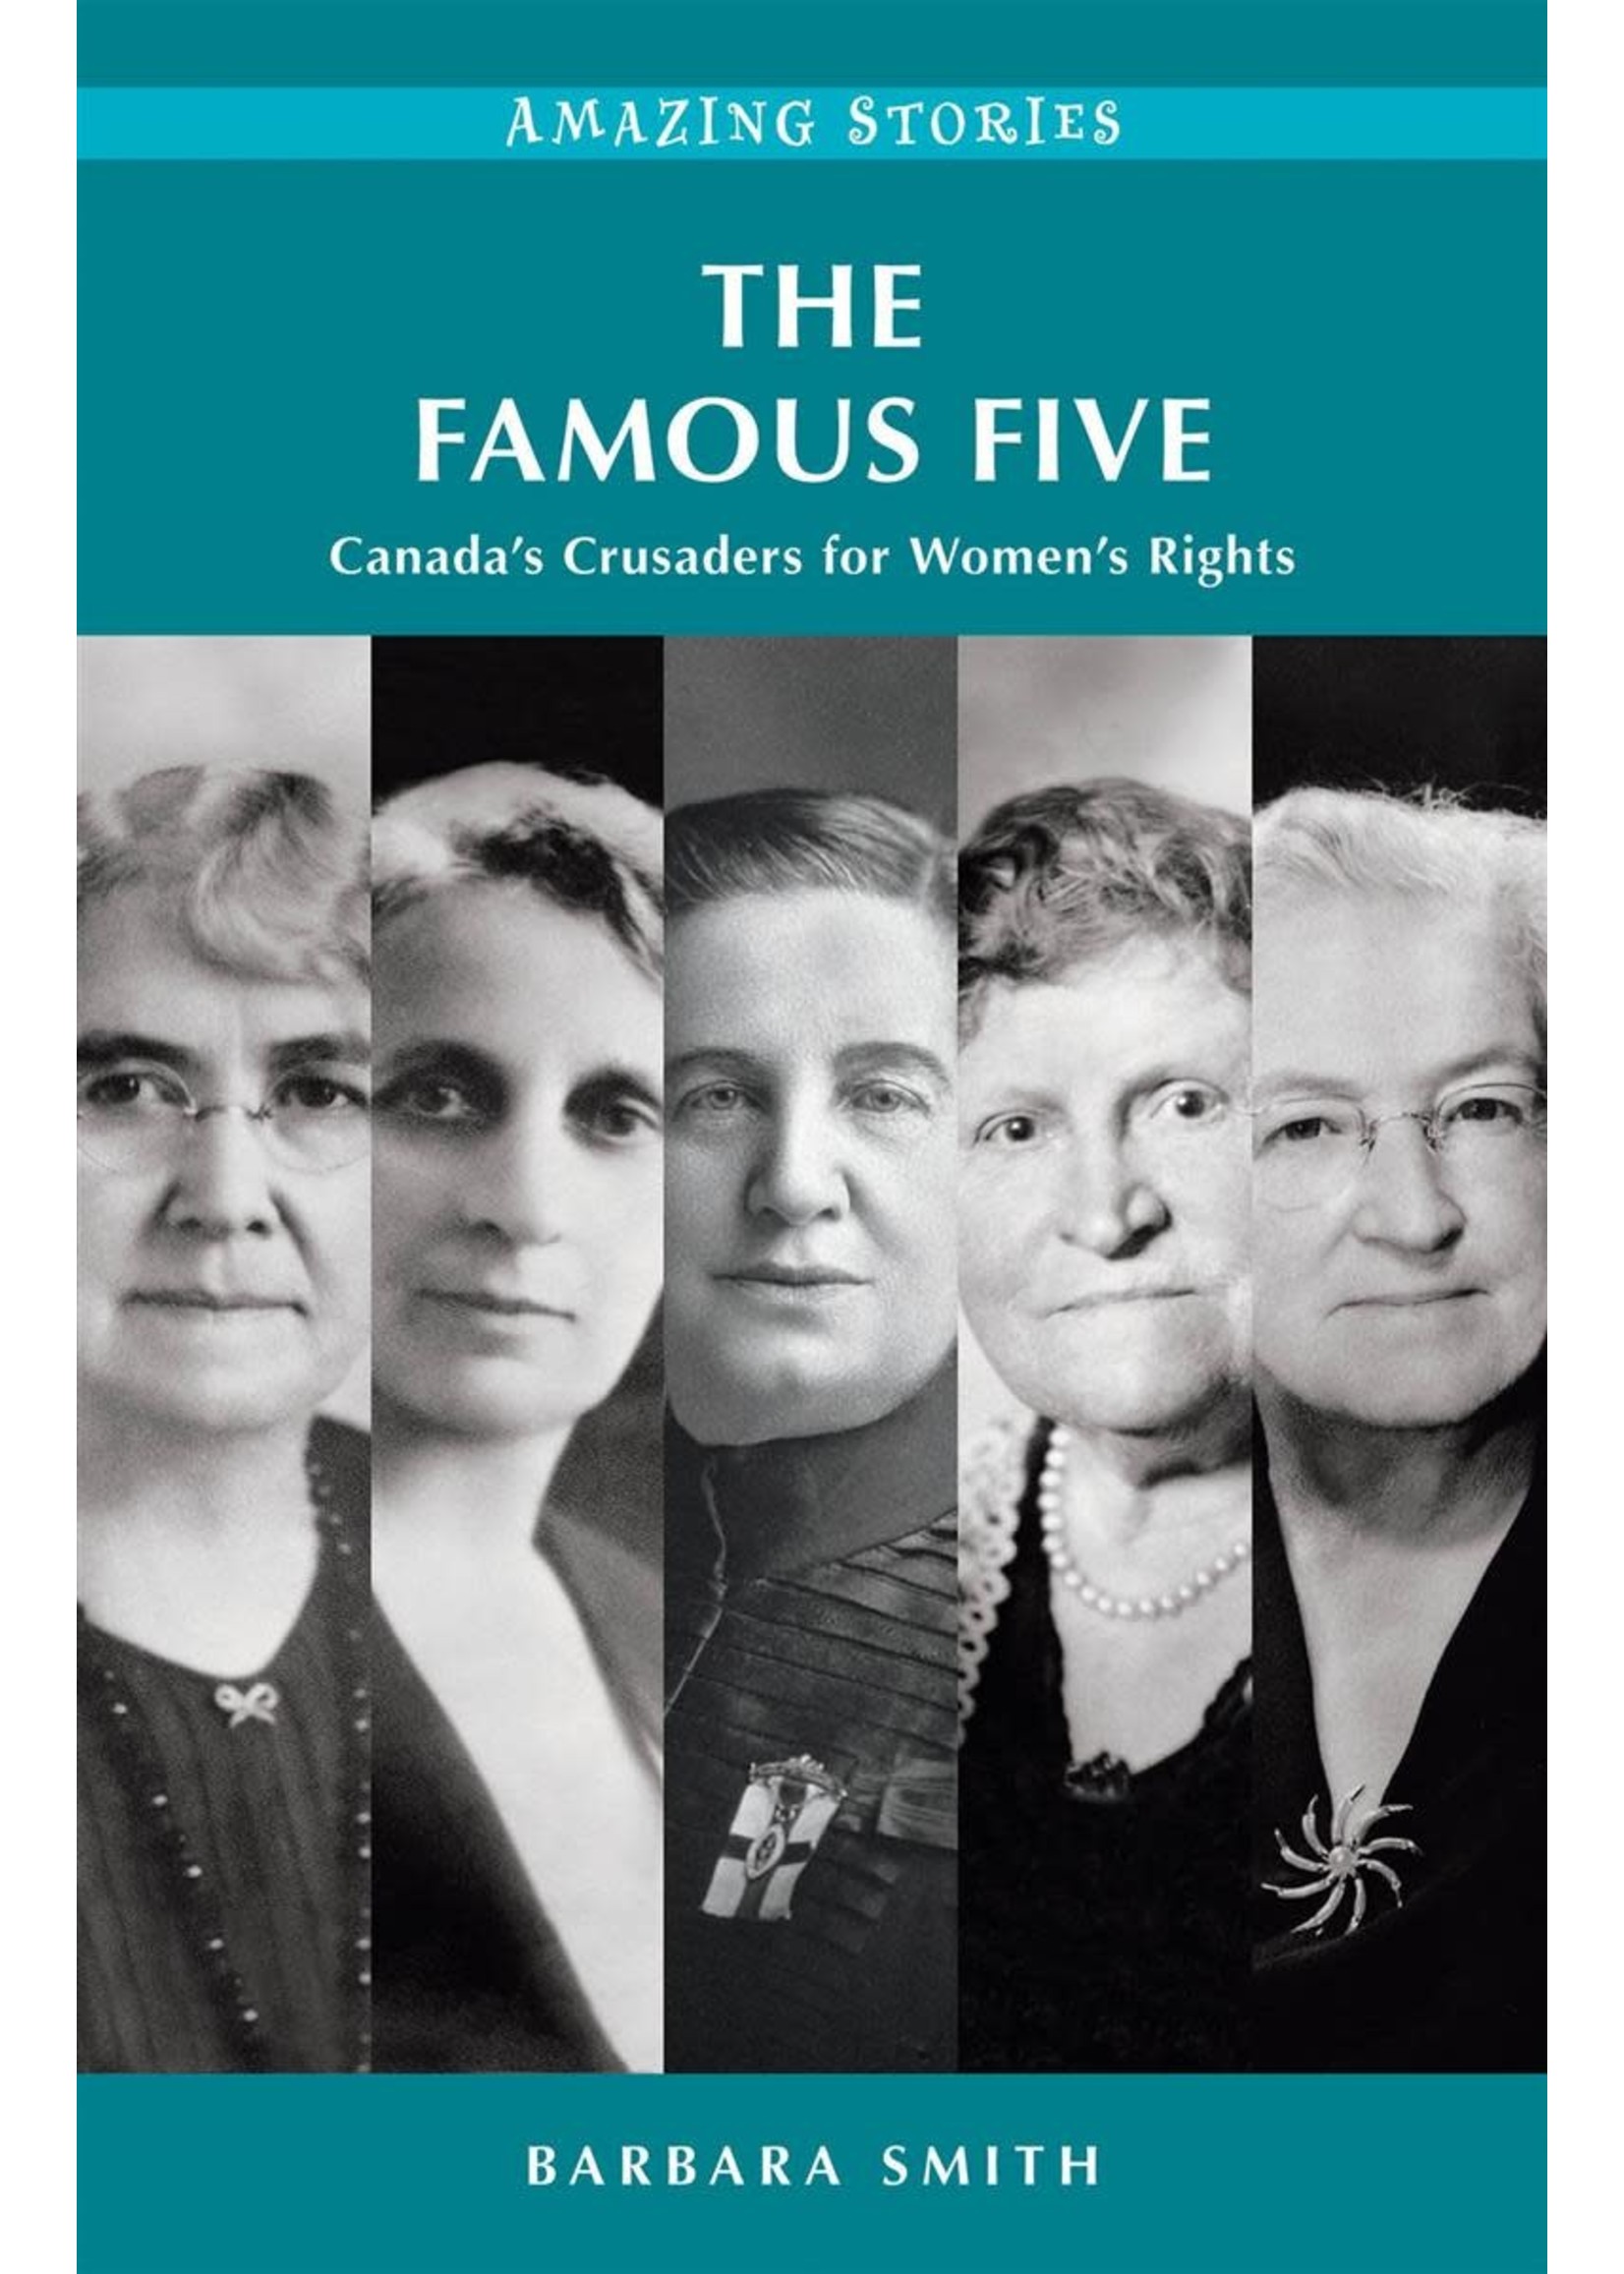 The Famous Five: Canada’s Crusaders for Women’s Rights by Barbara Smith